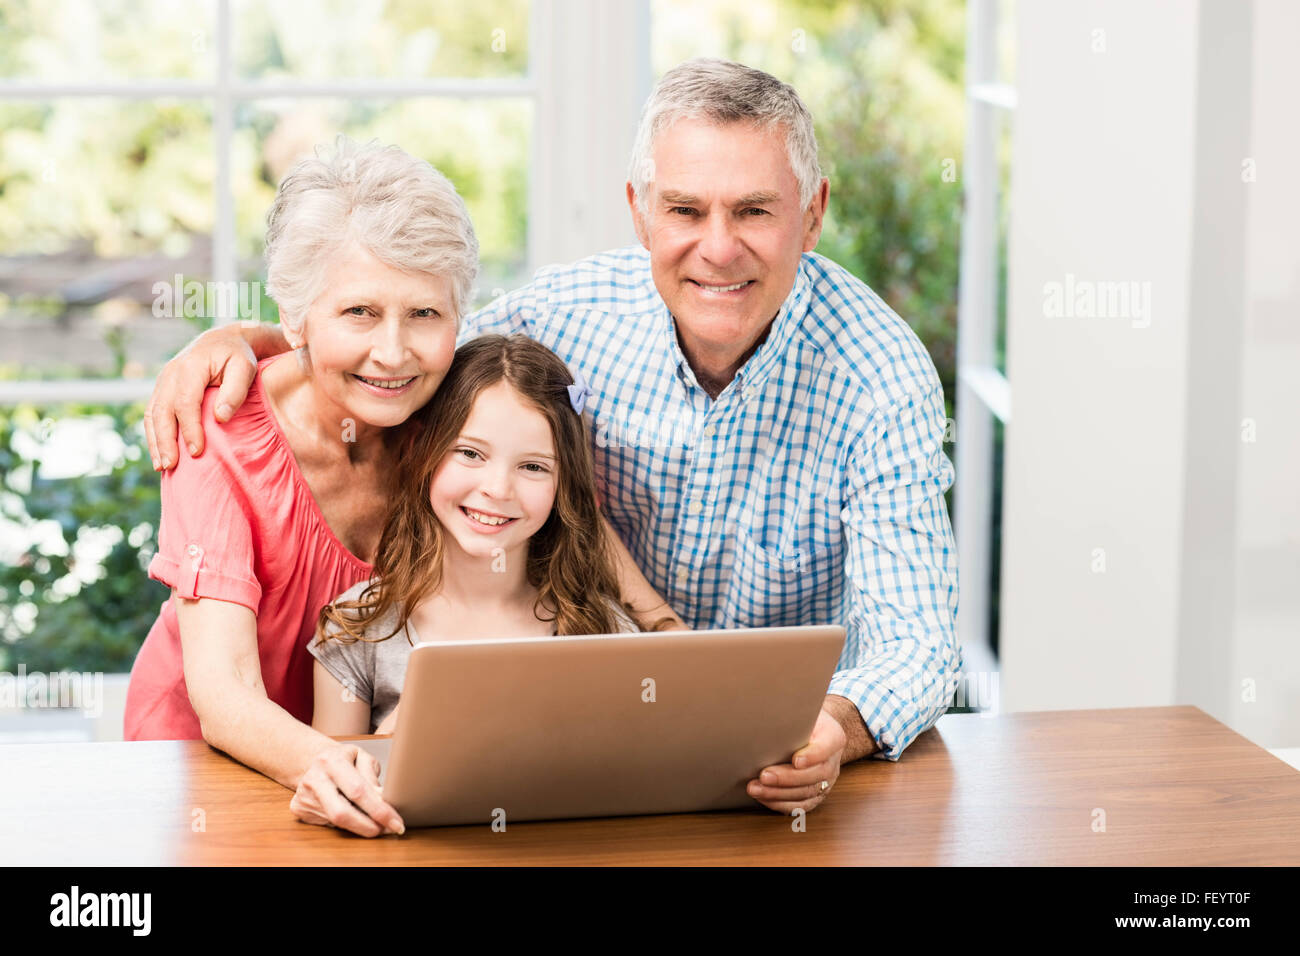 Portrait of smiling grandparents and granddaughter using laptop Stock Photo